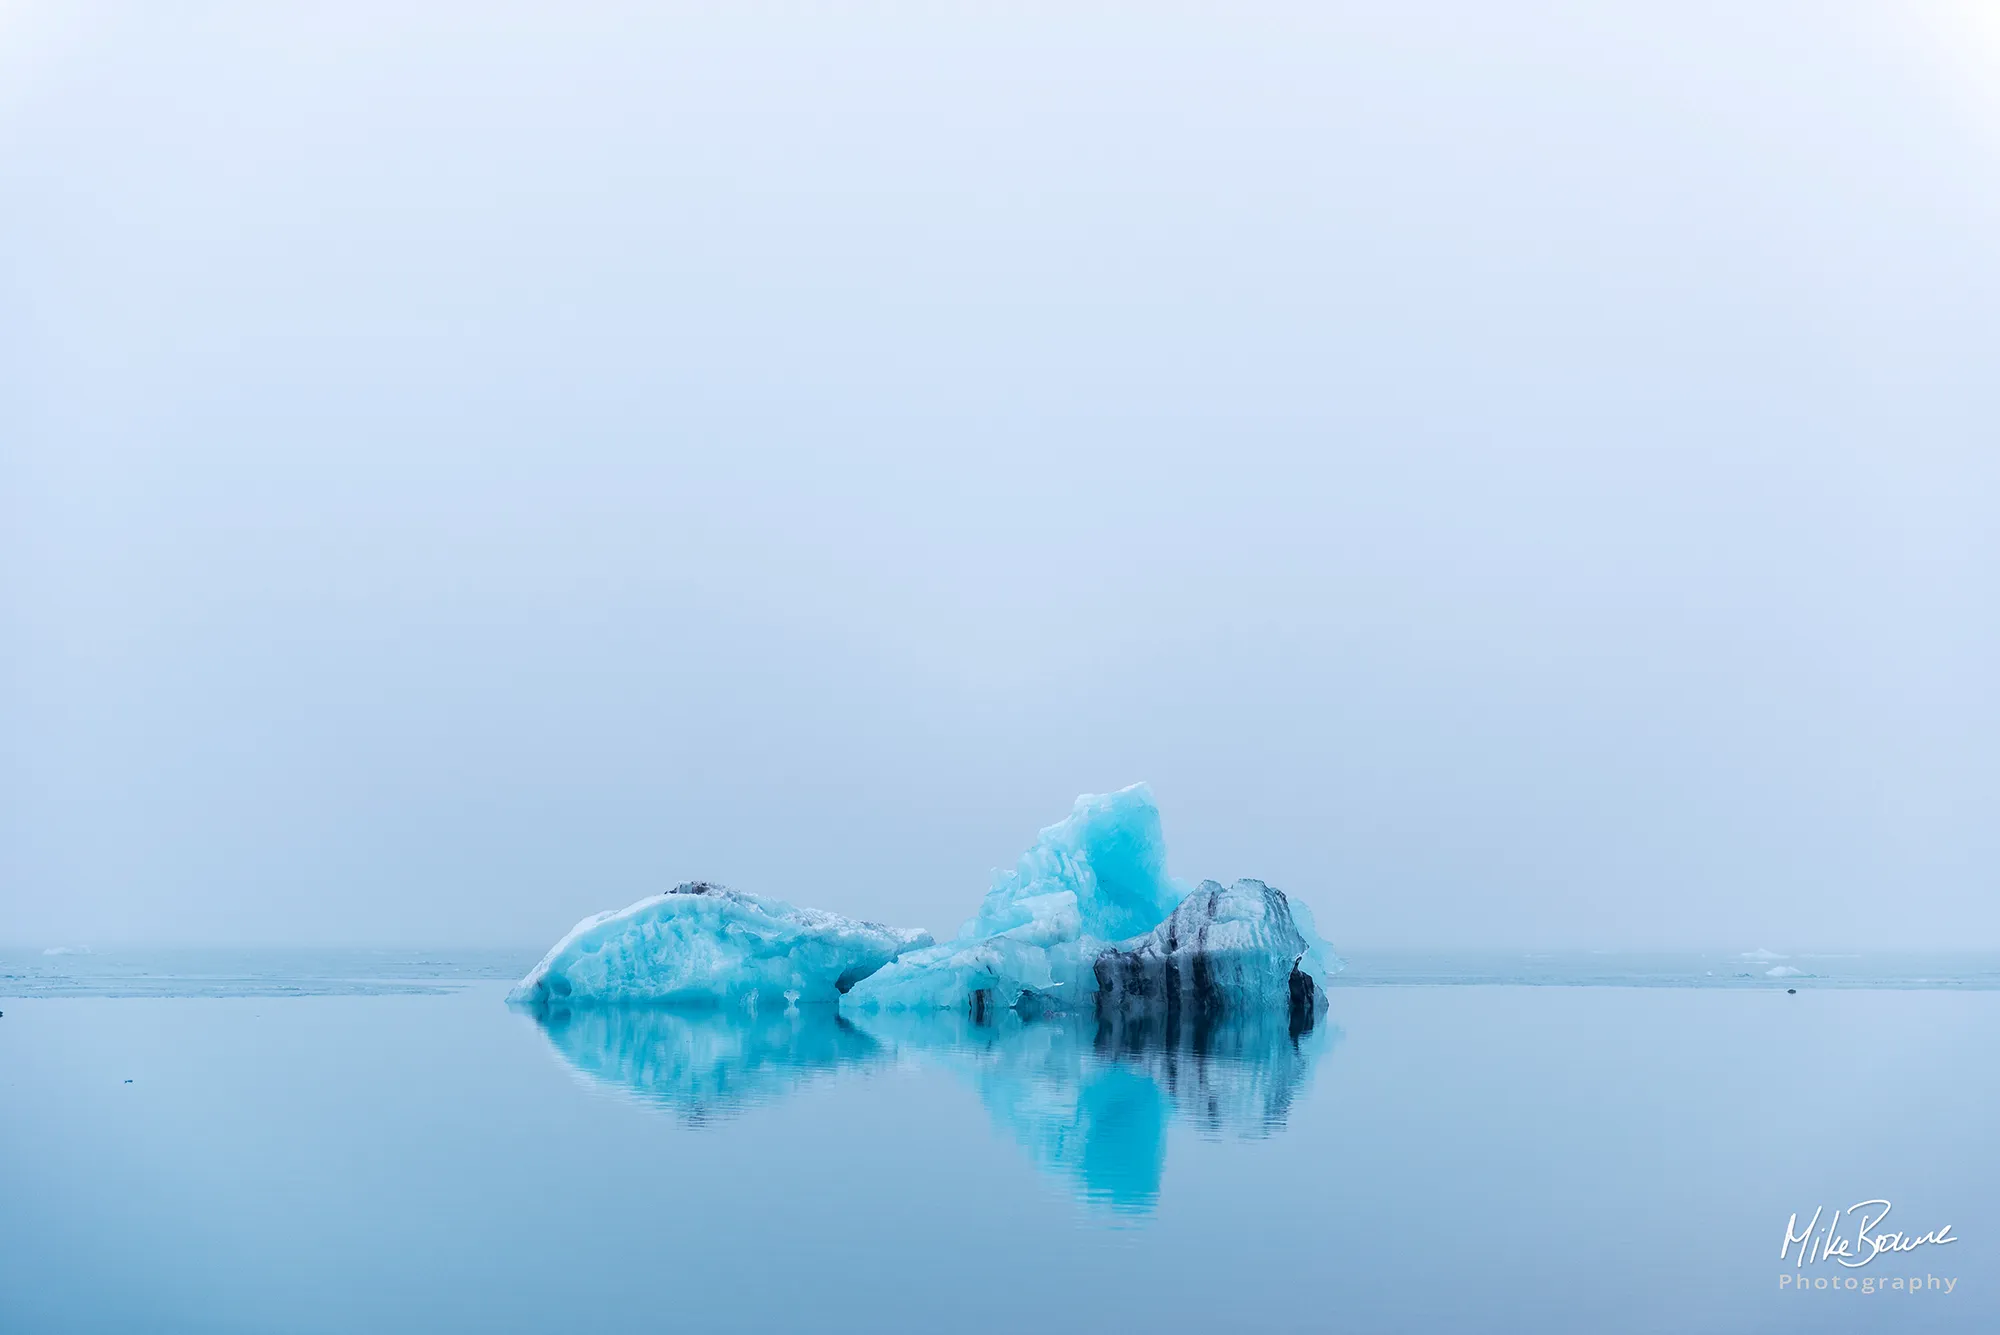 Iceberg and reflection floating on still blue water